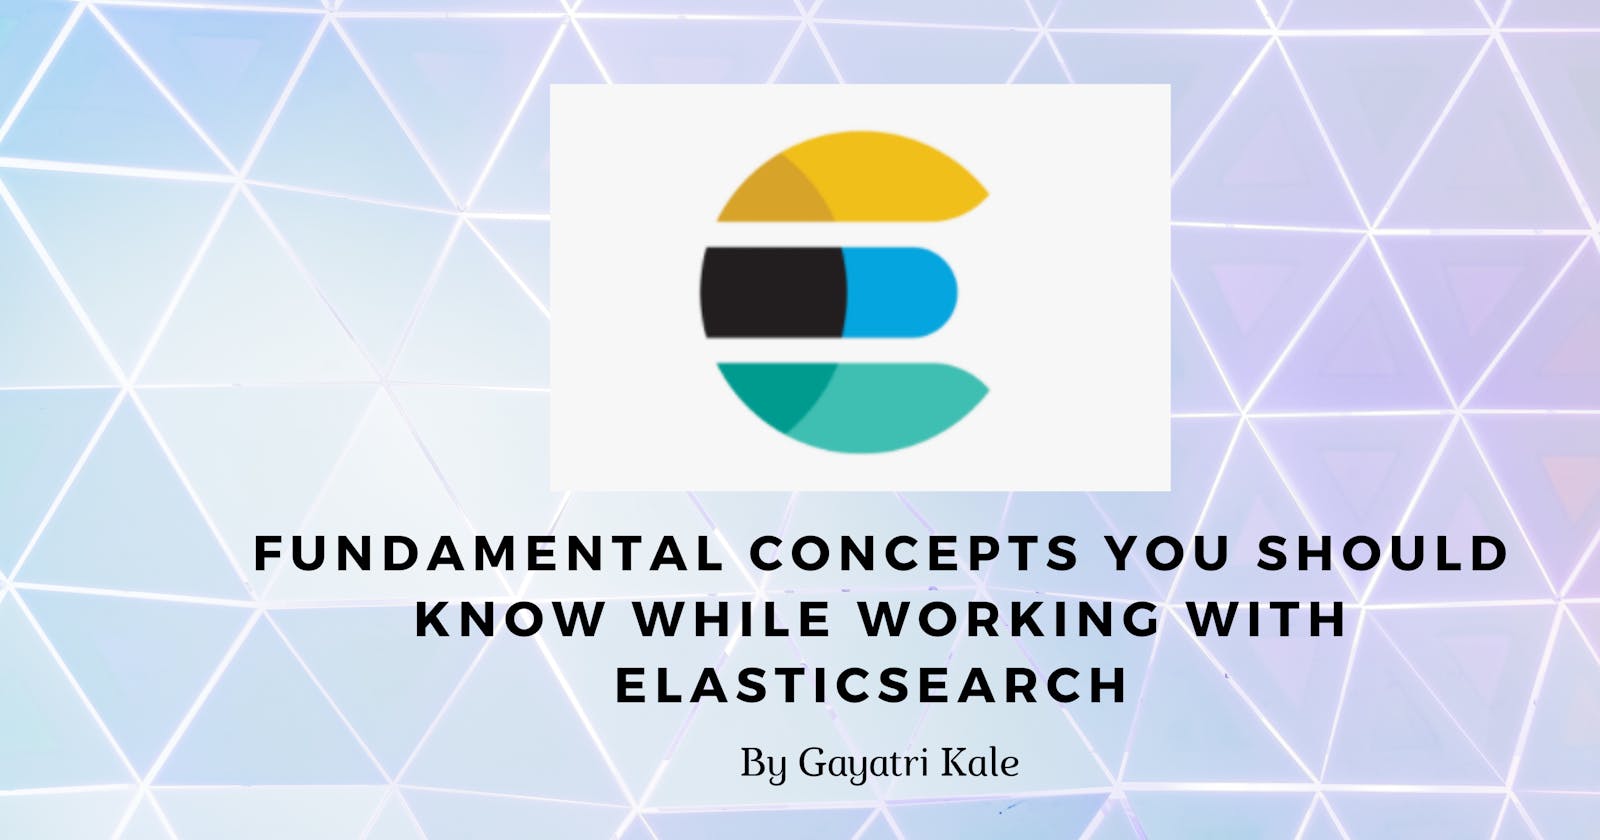 Fundamental concepts you should know while working with Elasticsearch